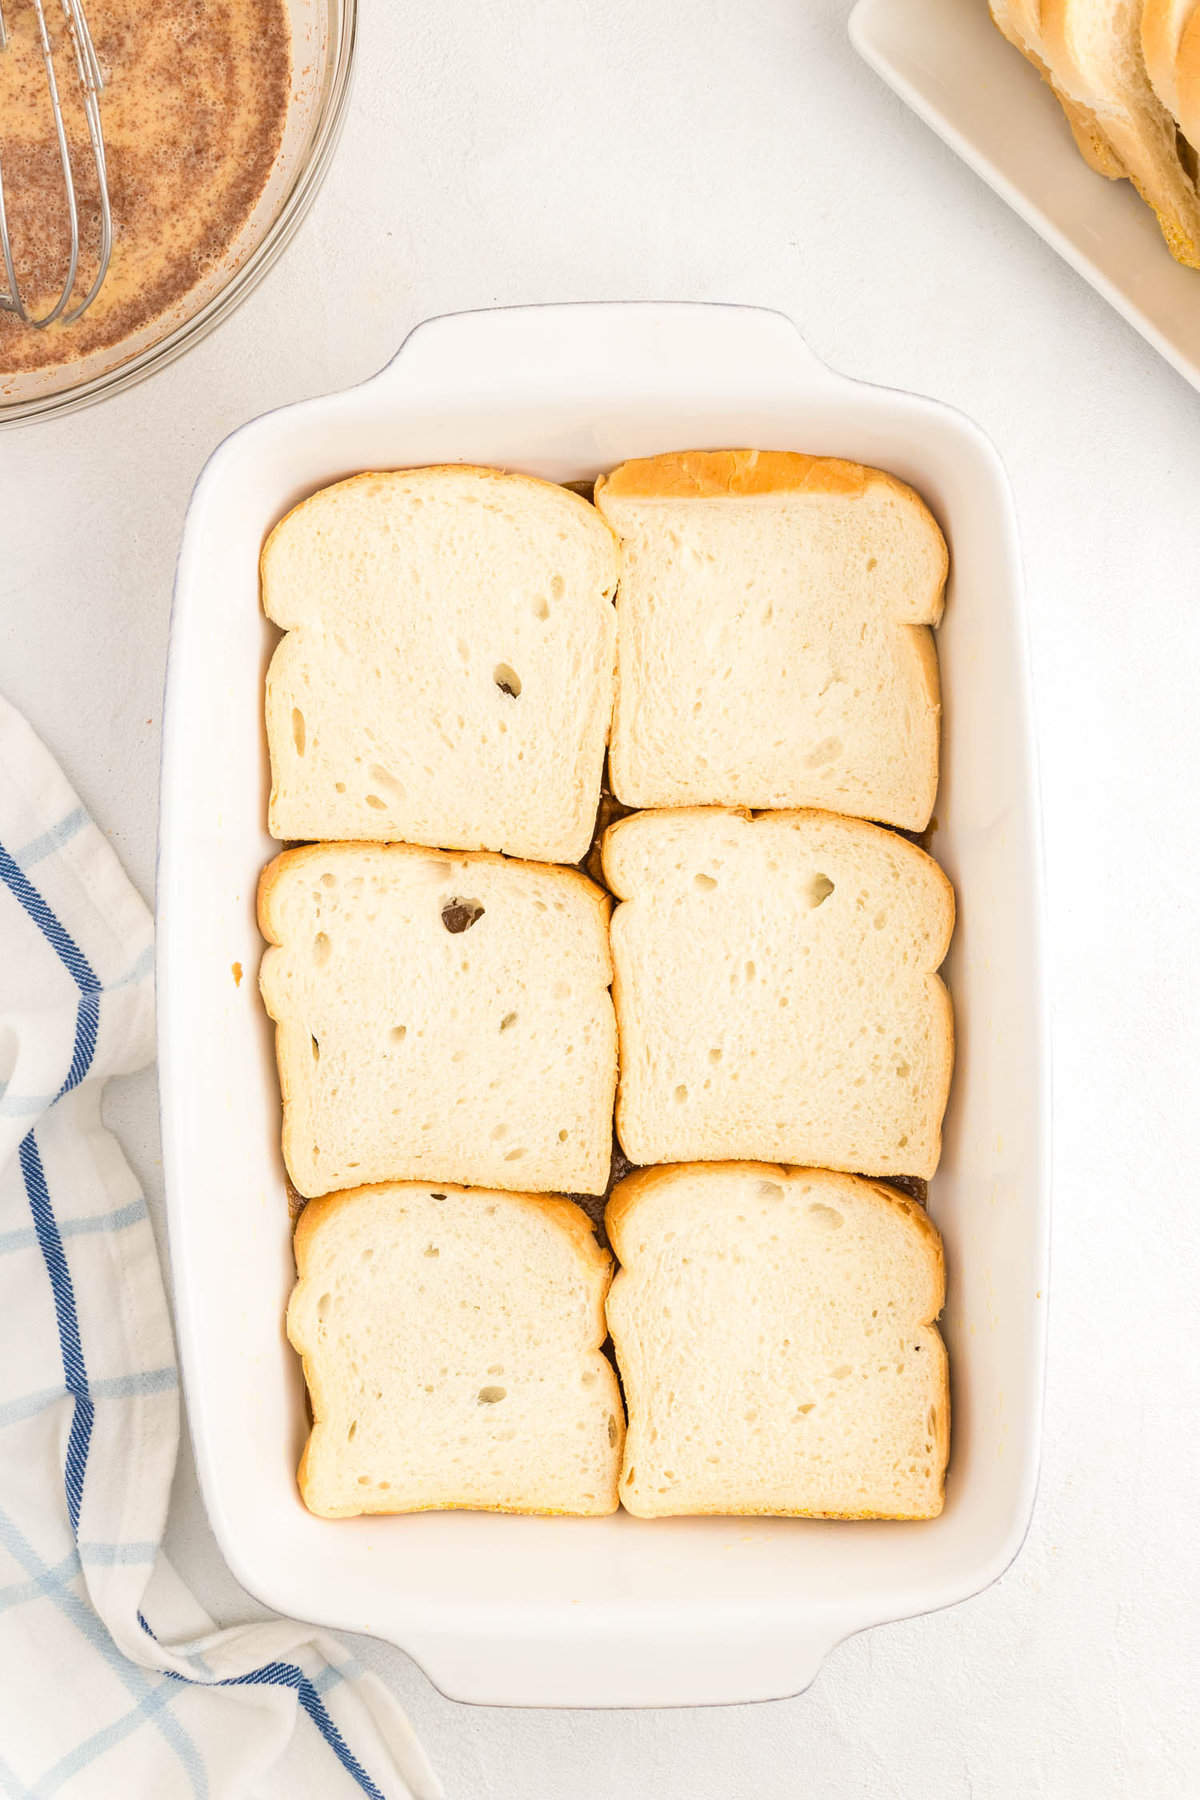 Lining thick and hearty bread slices in baking dish for French Toast Casserole